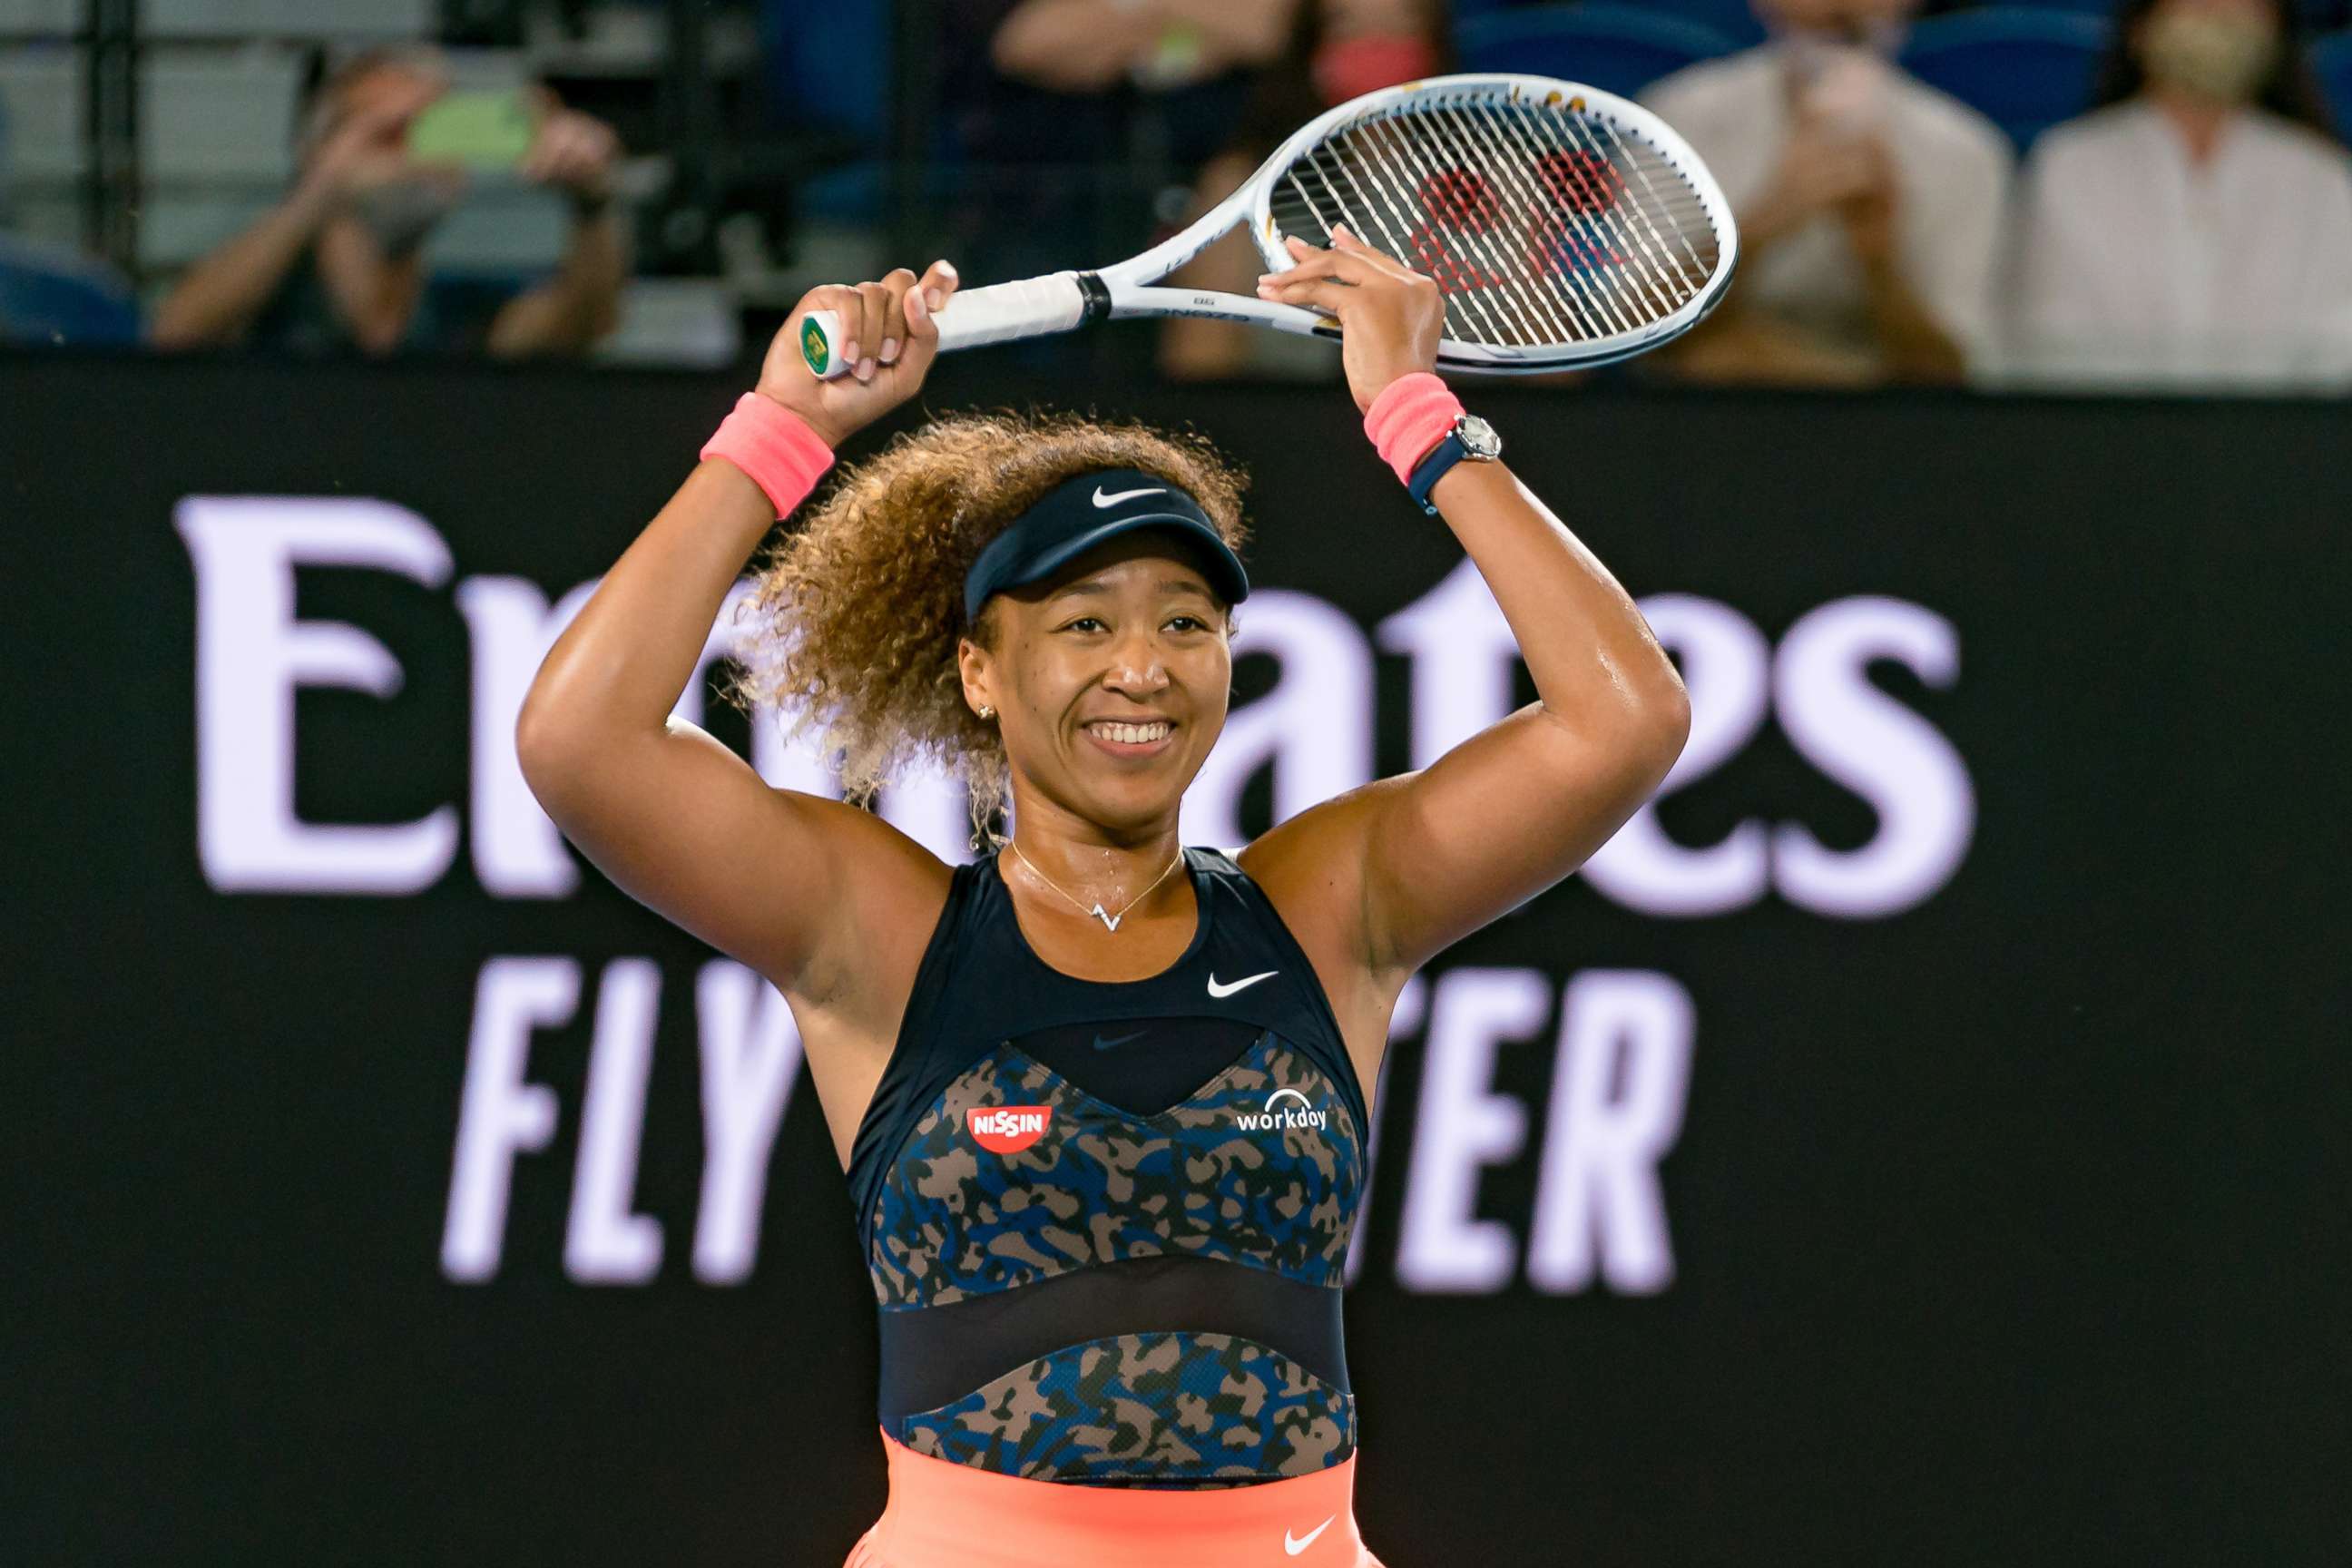 PHOTO: Naomi Osaka of Japan celebrates winning championship point in her Women's Singles Final at the Australian Open in Melbourne, Feb. 20, 2021.